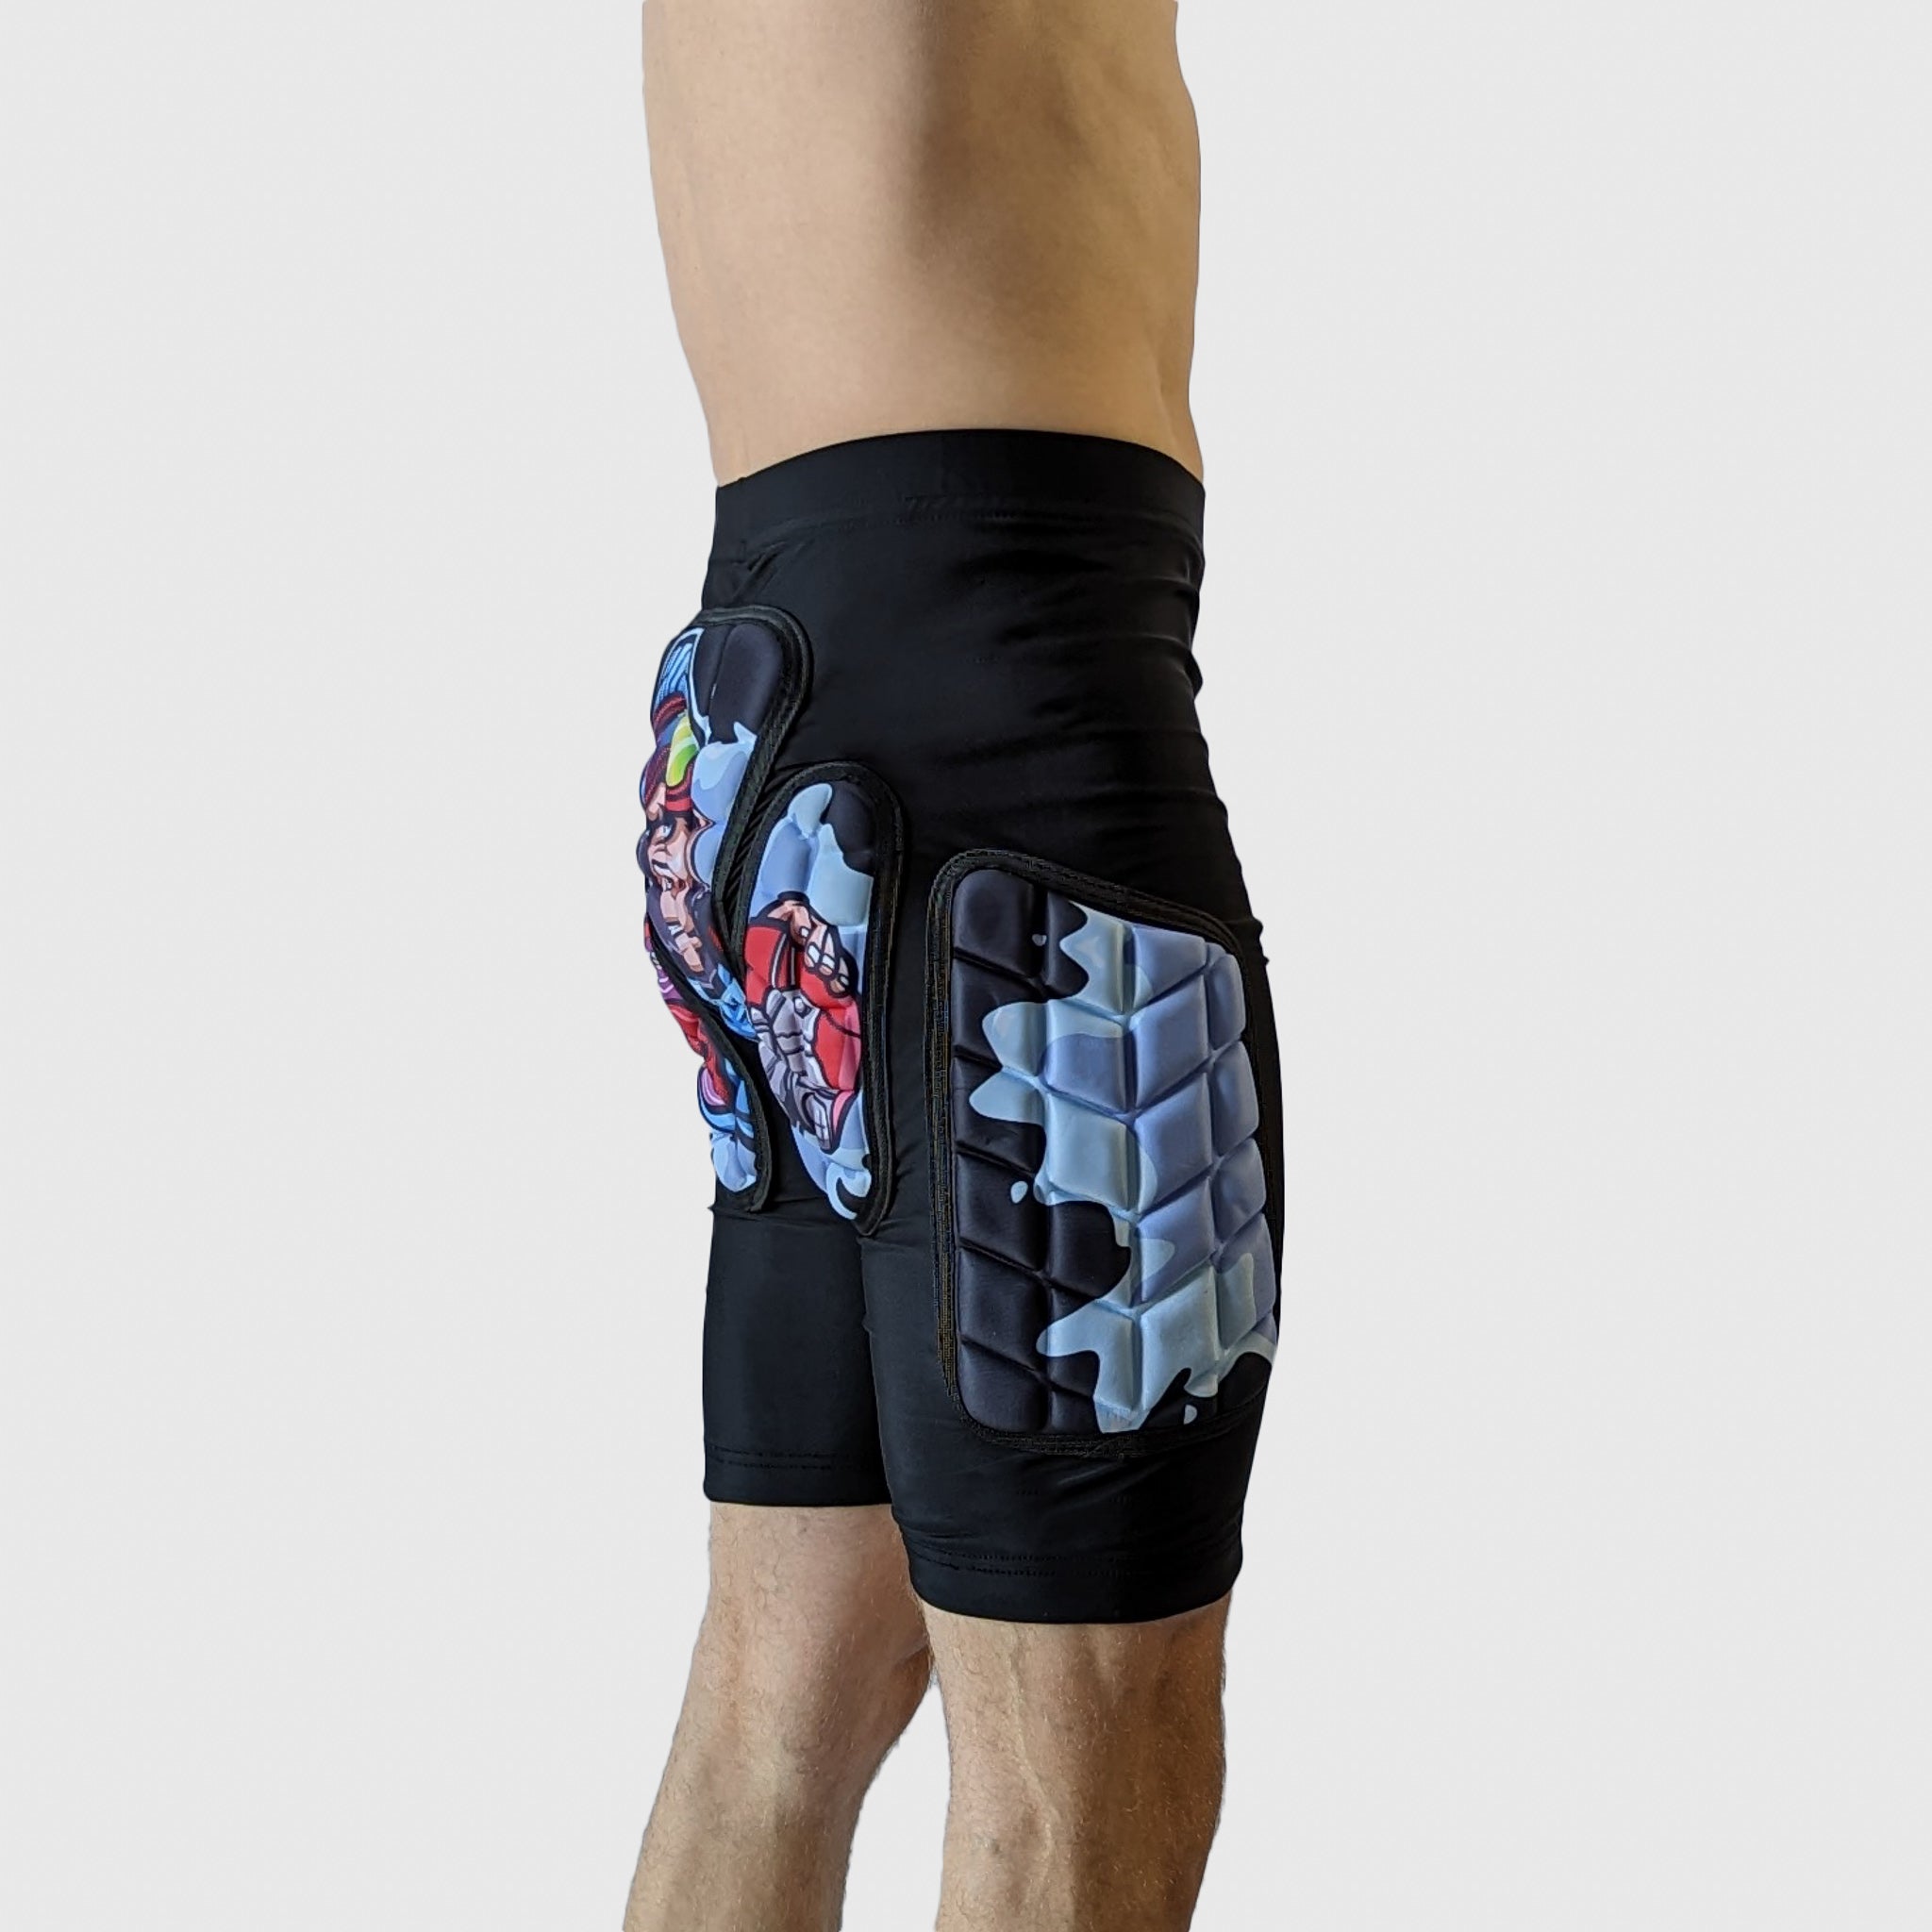 ✓ Best Protective Padded Shorts– Editor's Pick! 